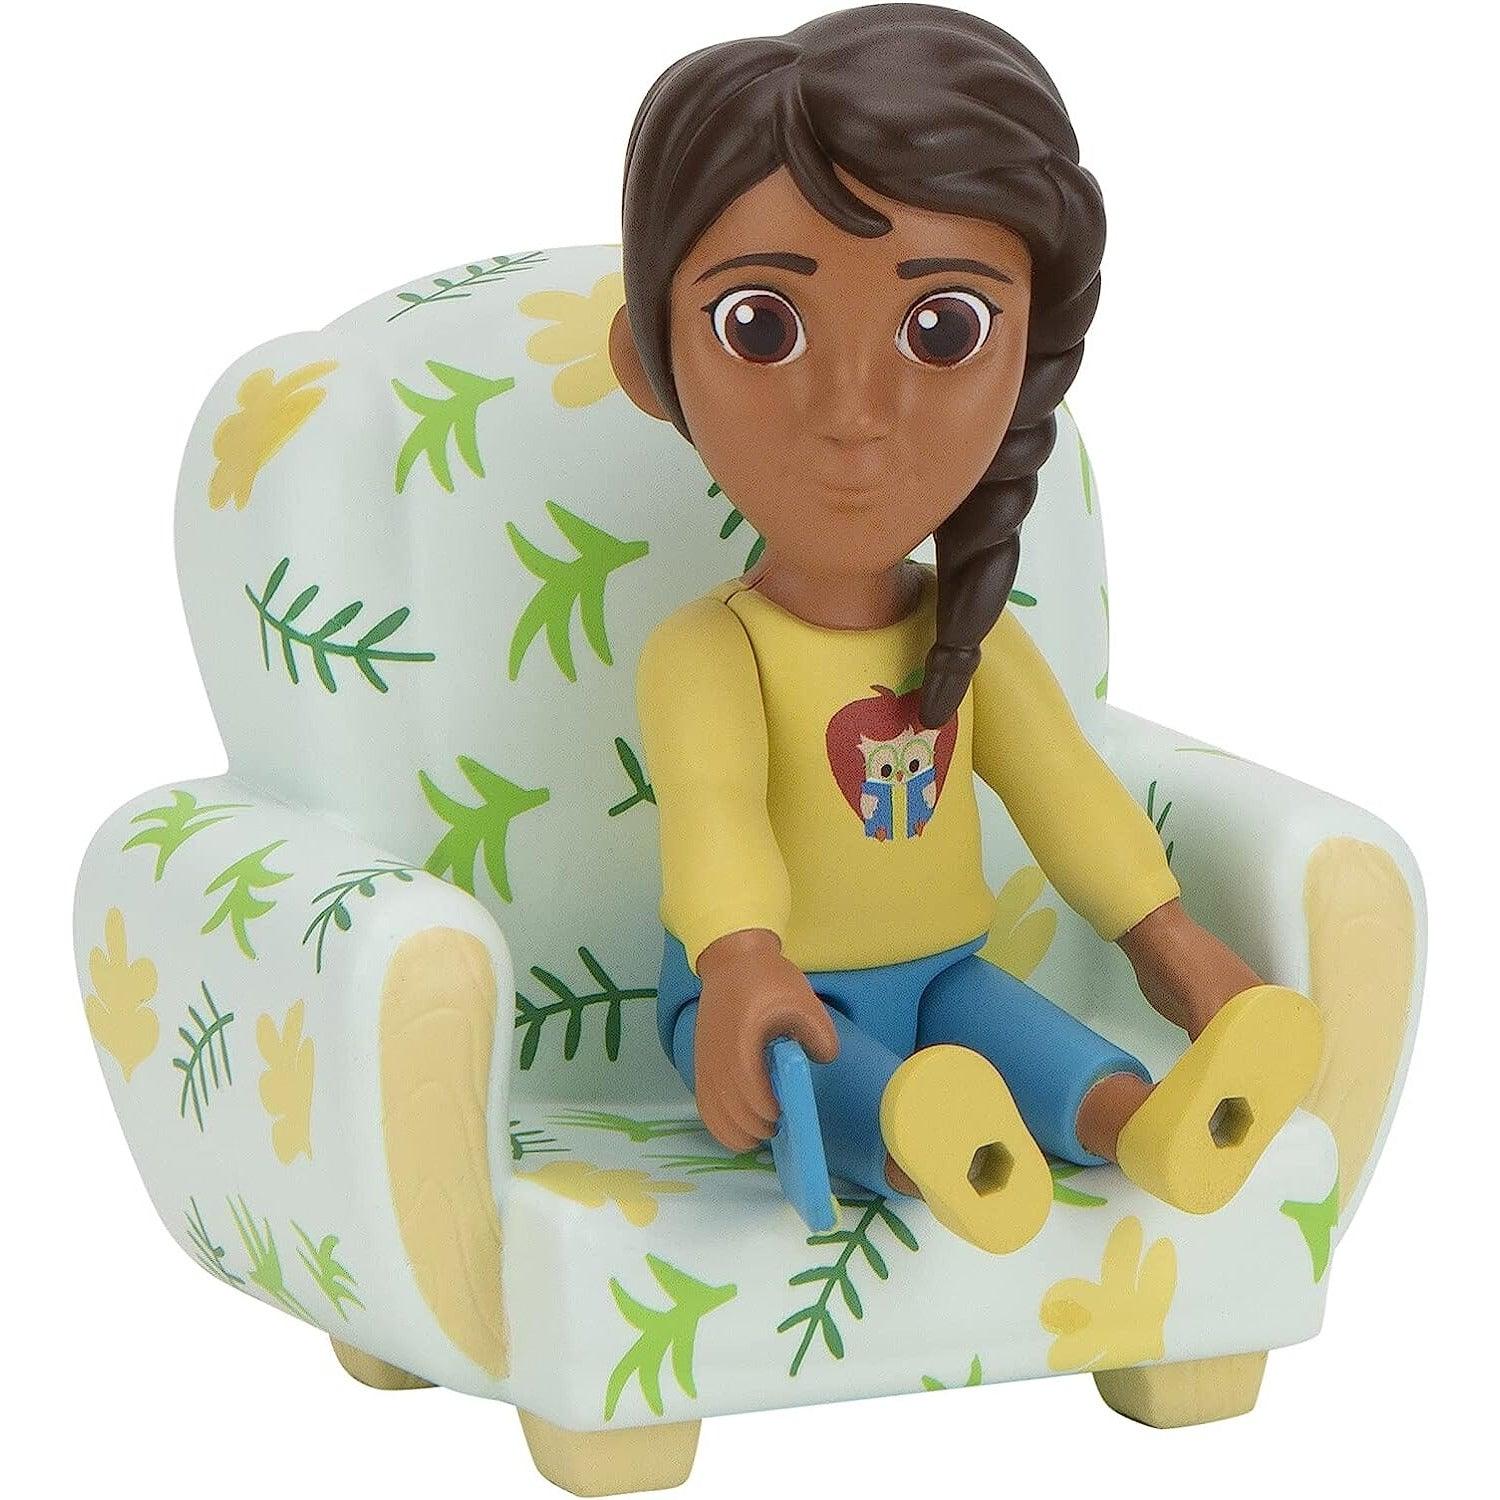 CoComelon School Time Deluxe Playtime Set - JJ, Bella, Ms. Appleberry The Teacher and 5 Accessories (Table, Cot, Armchair, Easel, Walls) - BumbleToys - 0-24 Months, Action Figures, Boys, Cocomelon, OXE, Pre-Order